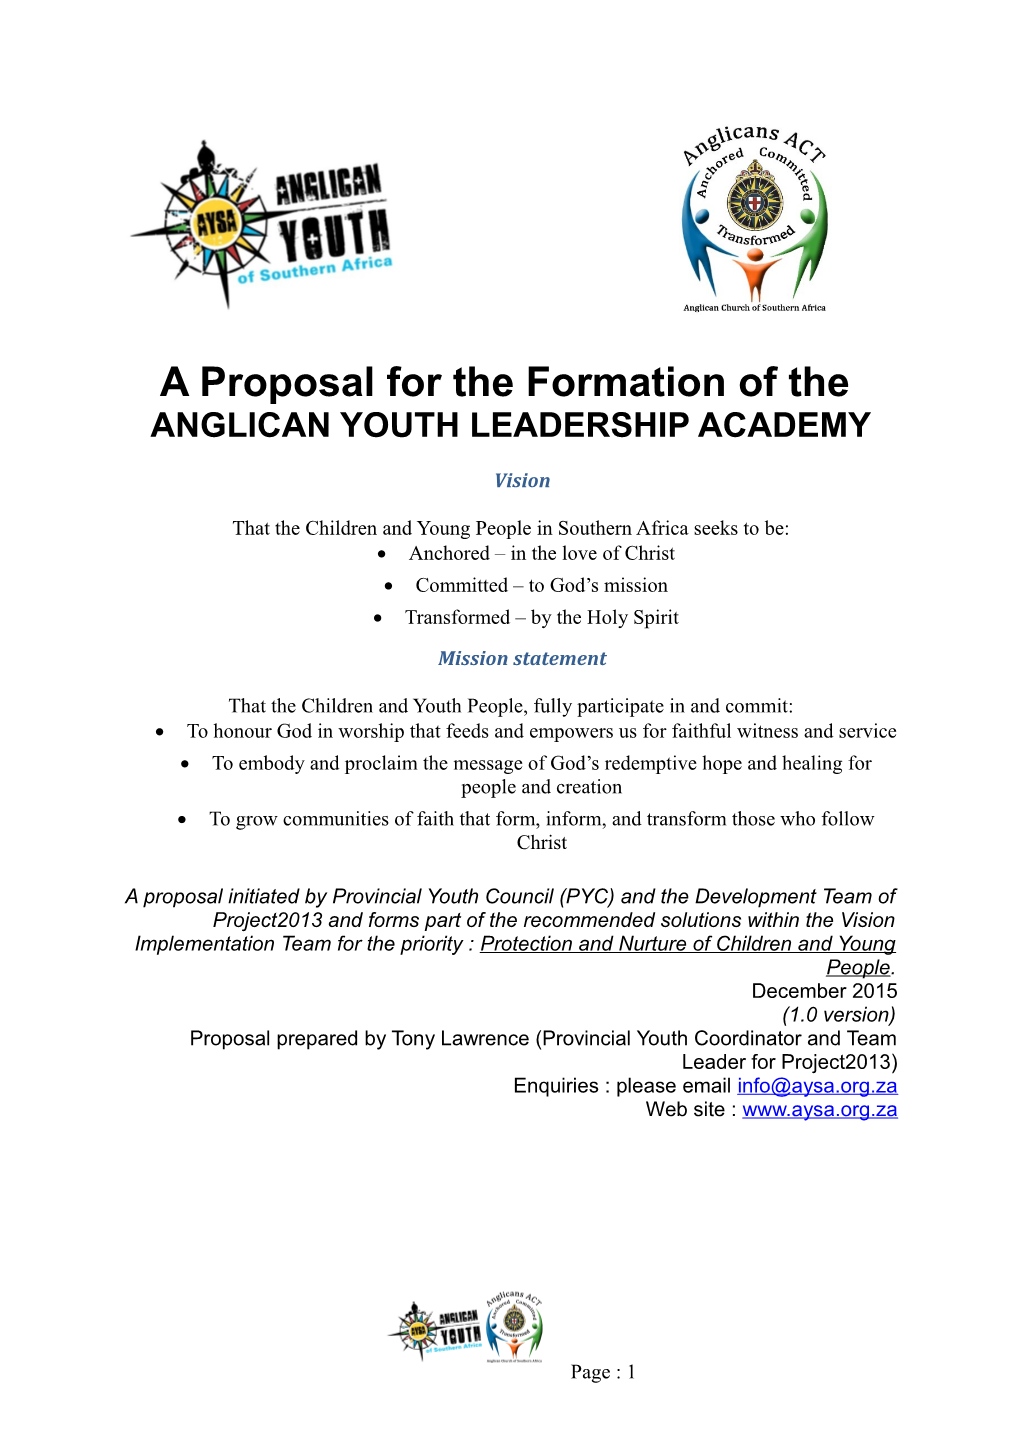 A Proposal for the Formation of The